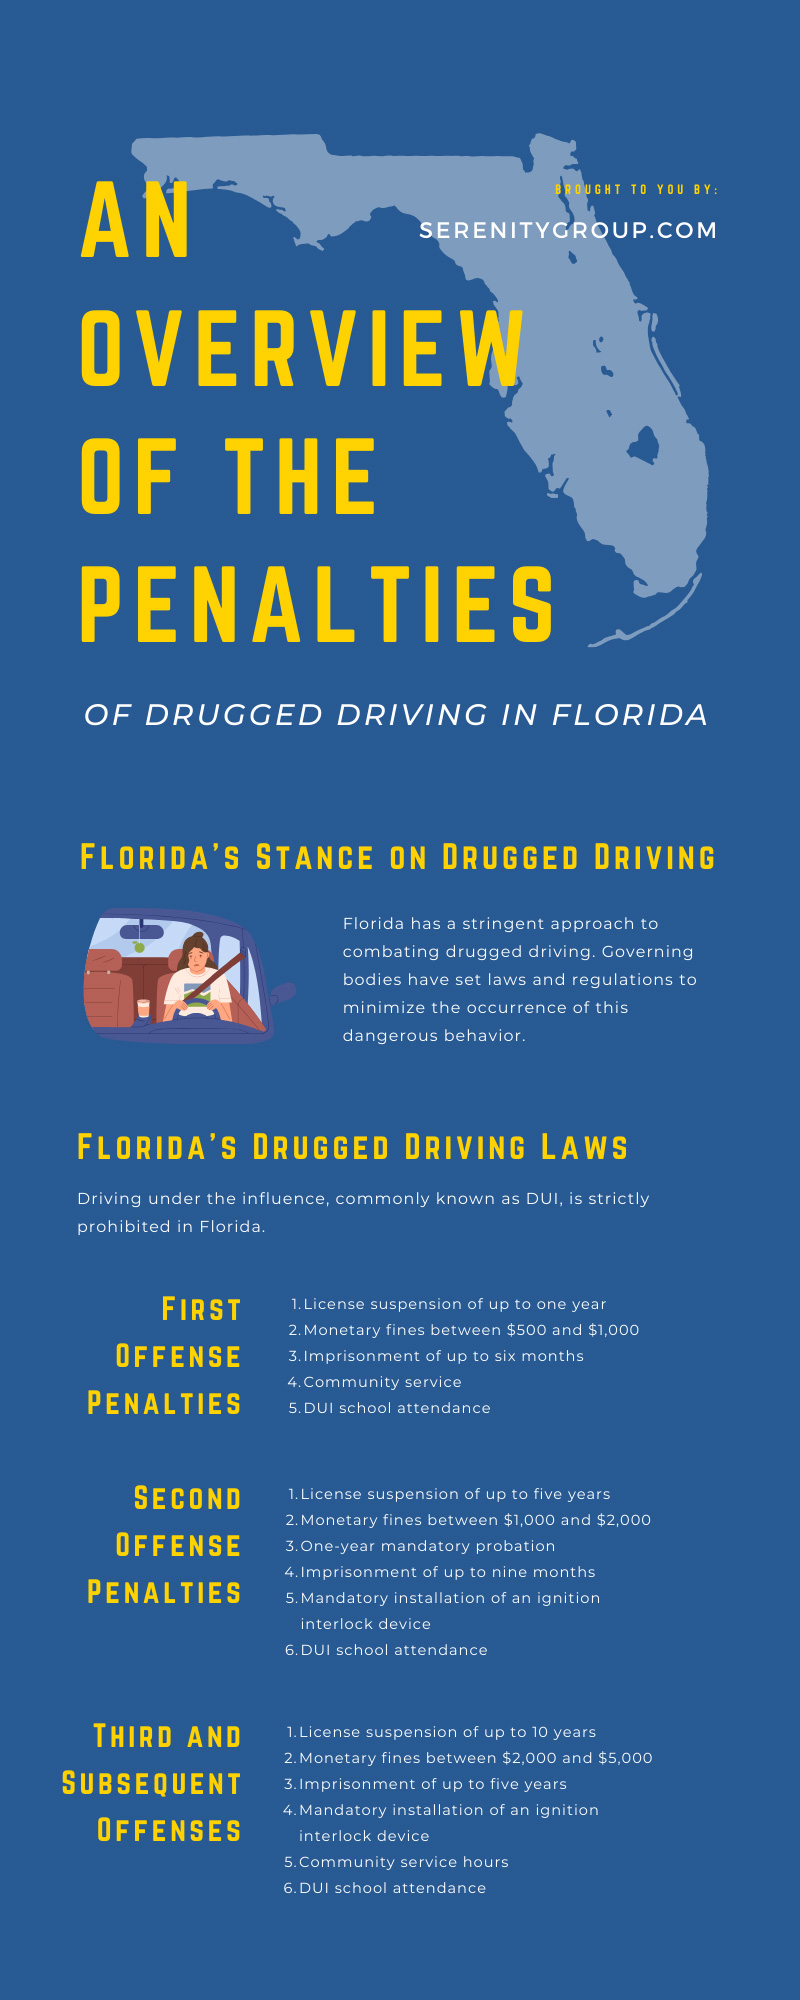 An Overview of the Penalties of Drugged Driving in Florida